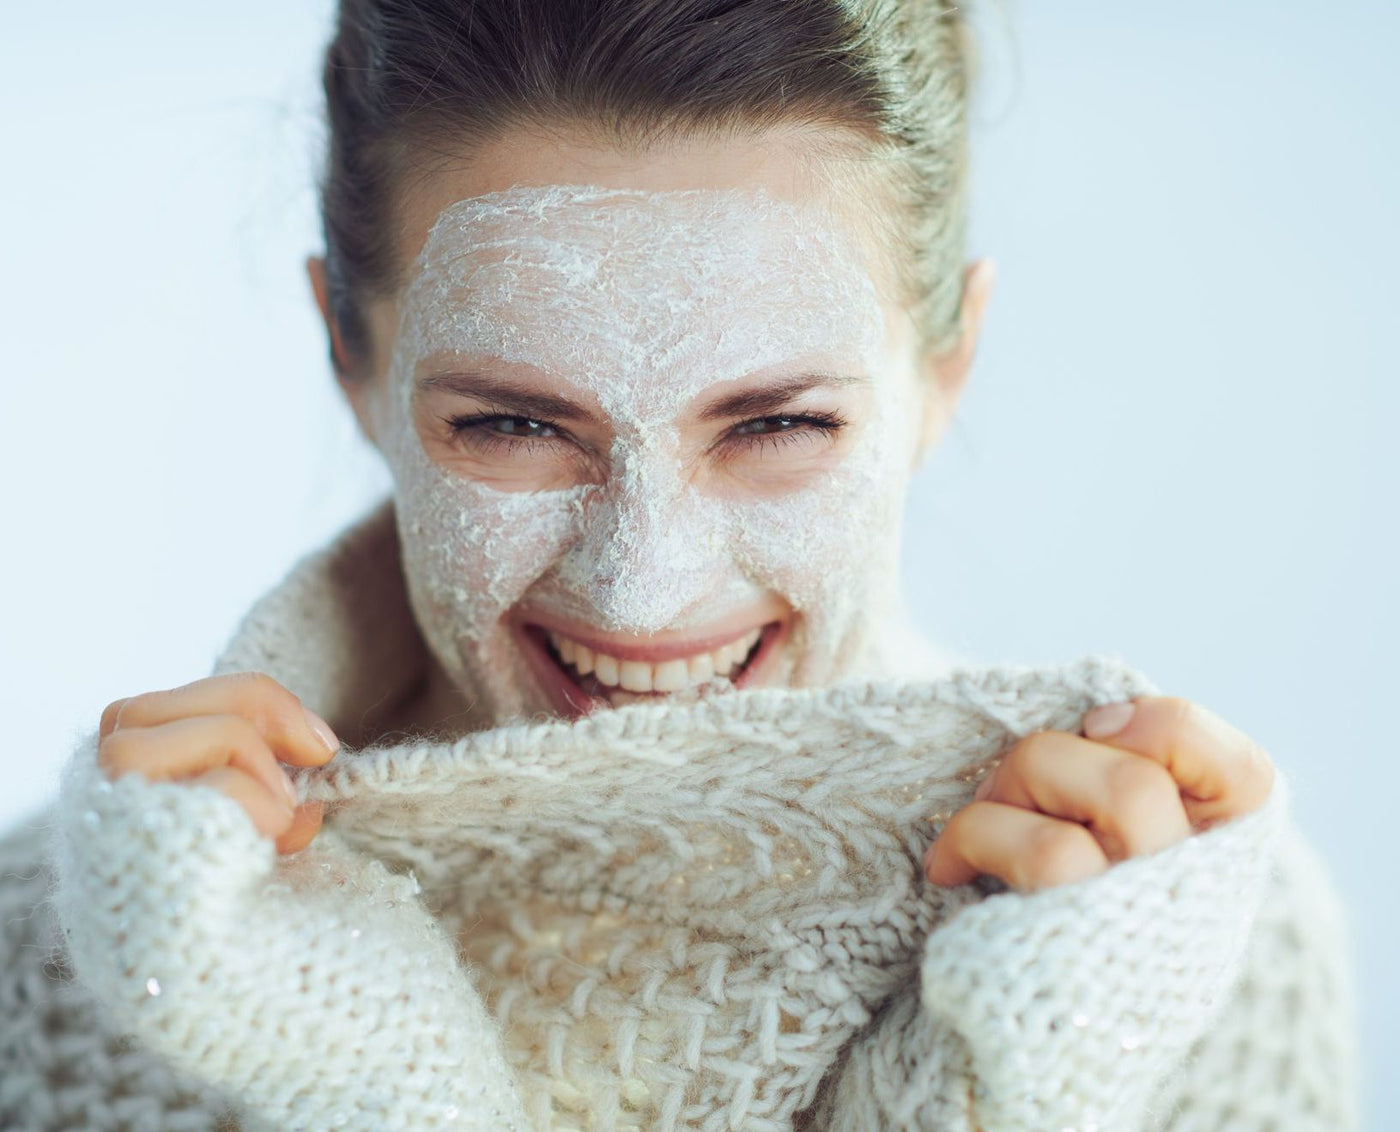 Looking after your skin in winter